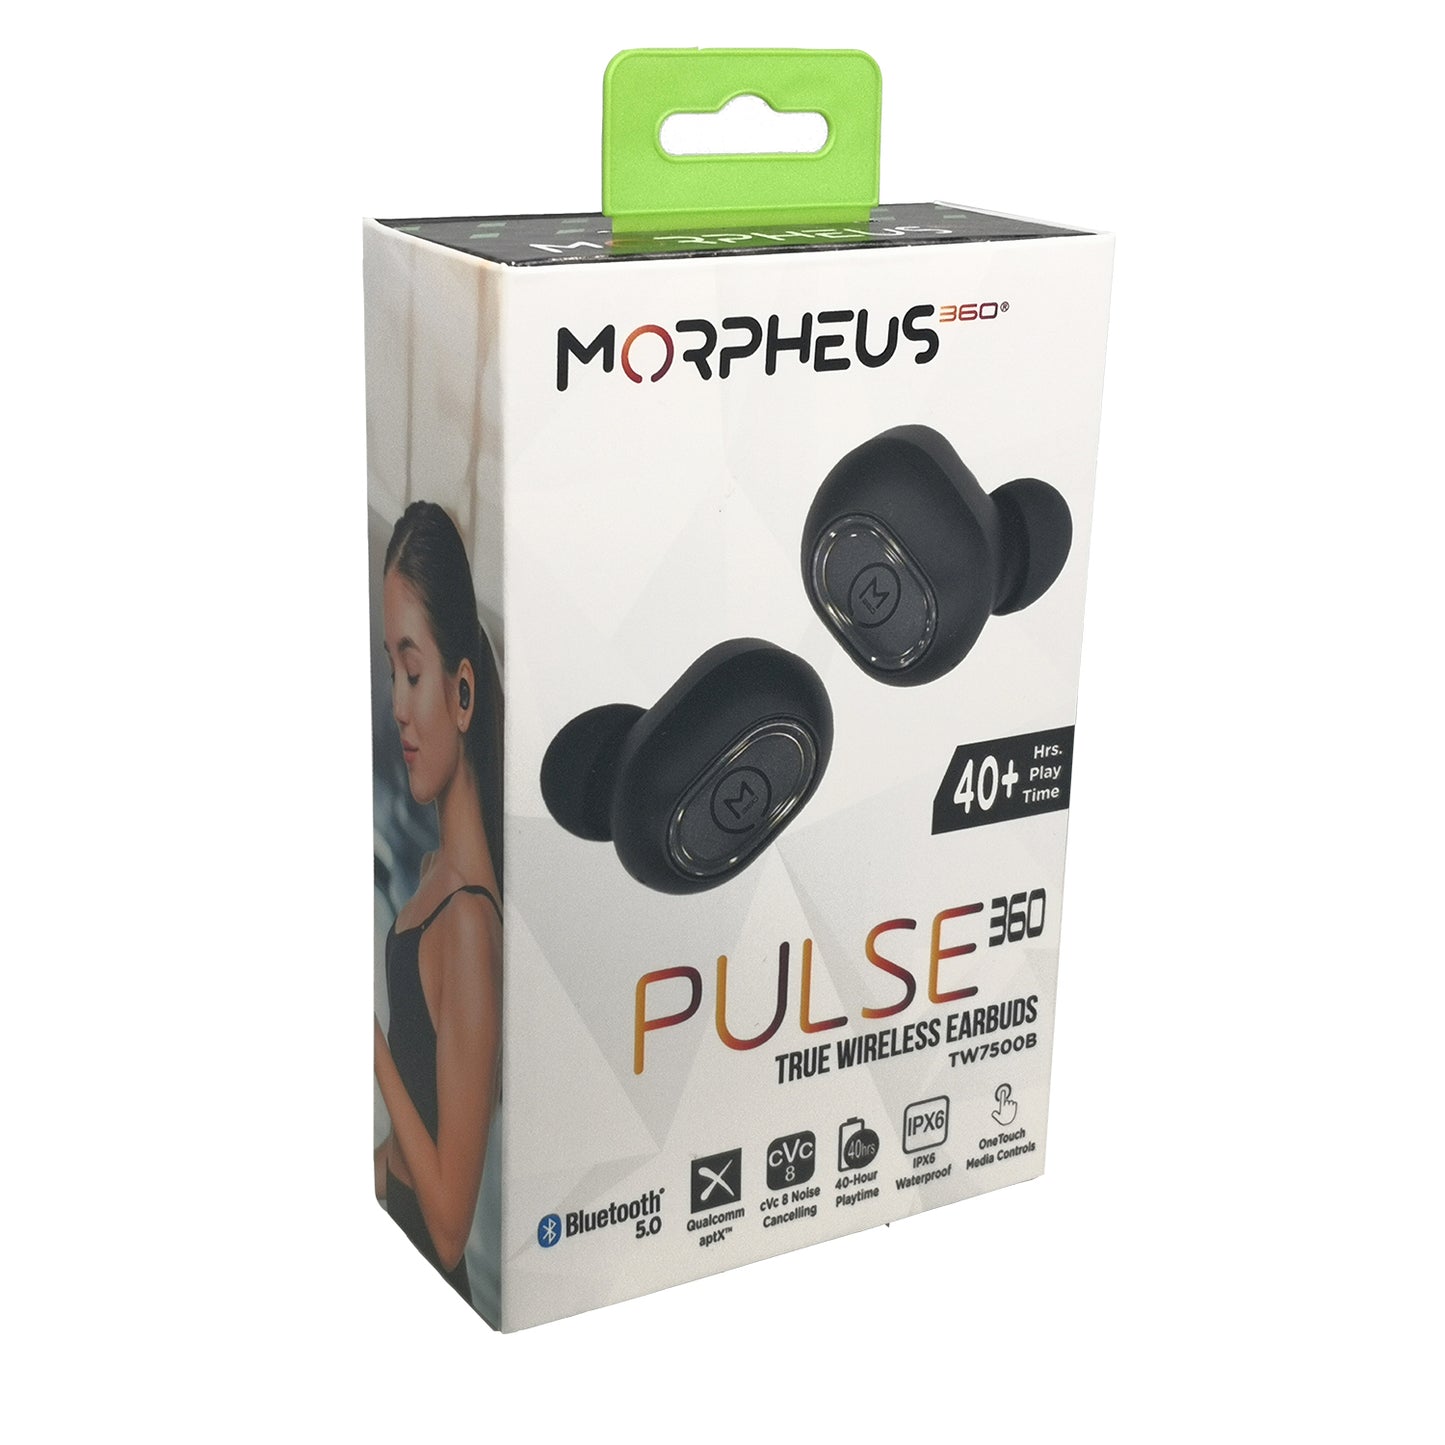 Photo of Morpheus 360 Pulse 360 True Wireless Earbuds Retail packaging. The front of the retail packaging displays the left and right earbud, as well as, Bluetooth 5.0, 40+ hours playtime, Qualcomm aptX, cVc 8 Noise Cancelling, IPX6 Waterproof, and One Touch Media Controls features. 